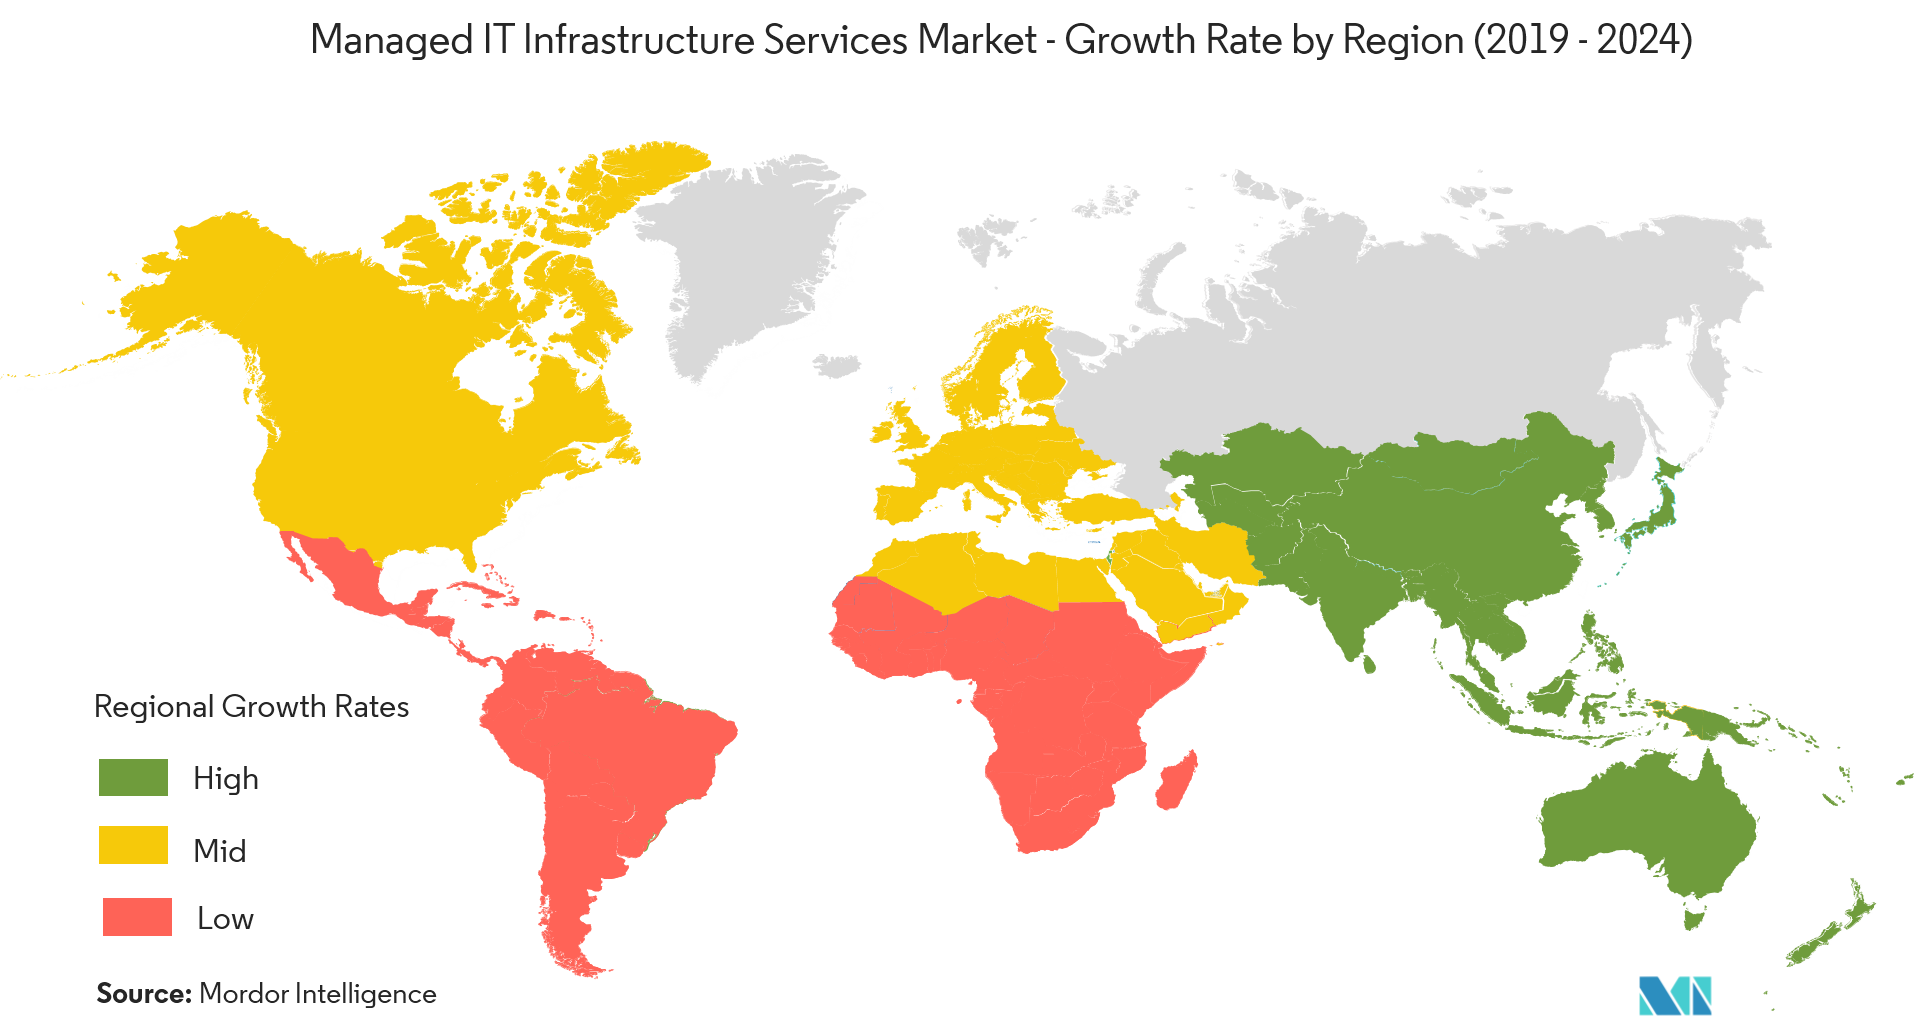 Managed IT Infrastructure Services Market - Growth Rate by Region ( 2019 - 2024 )